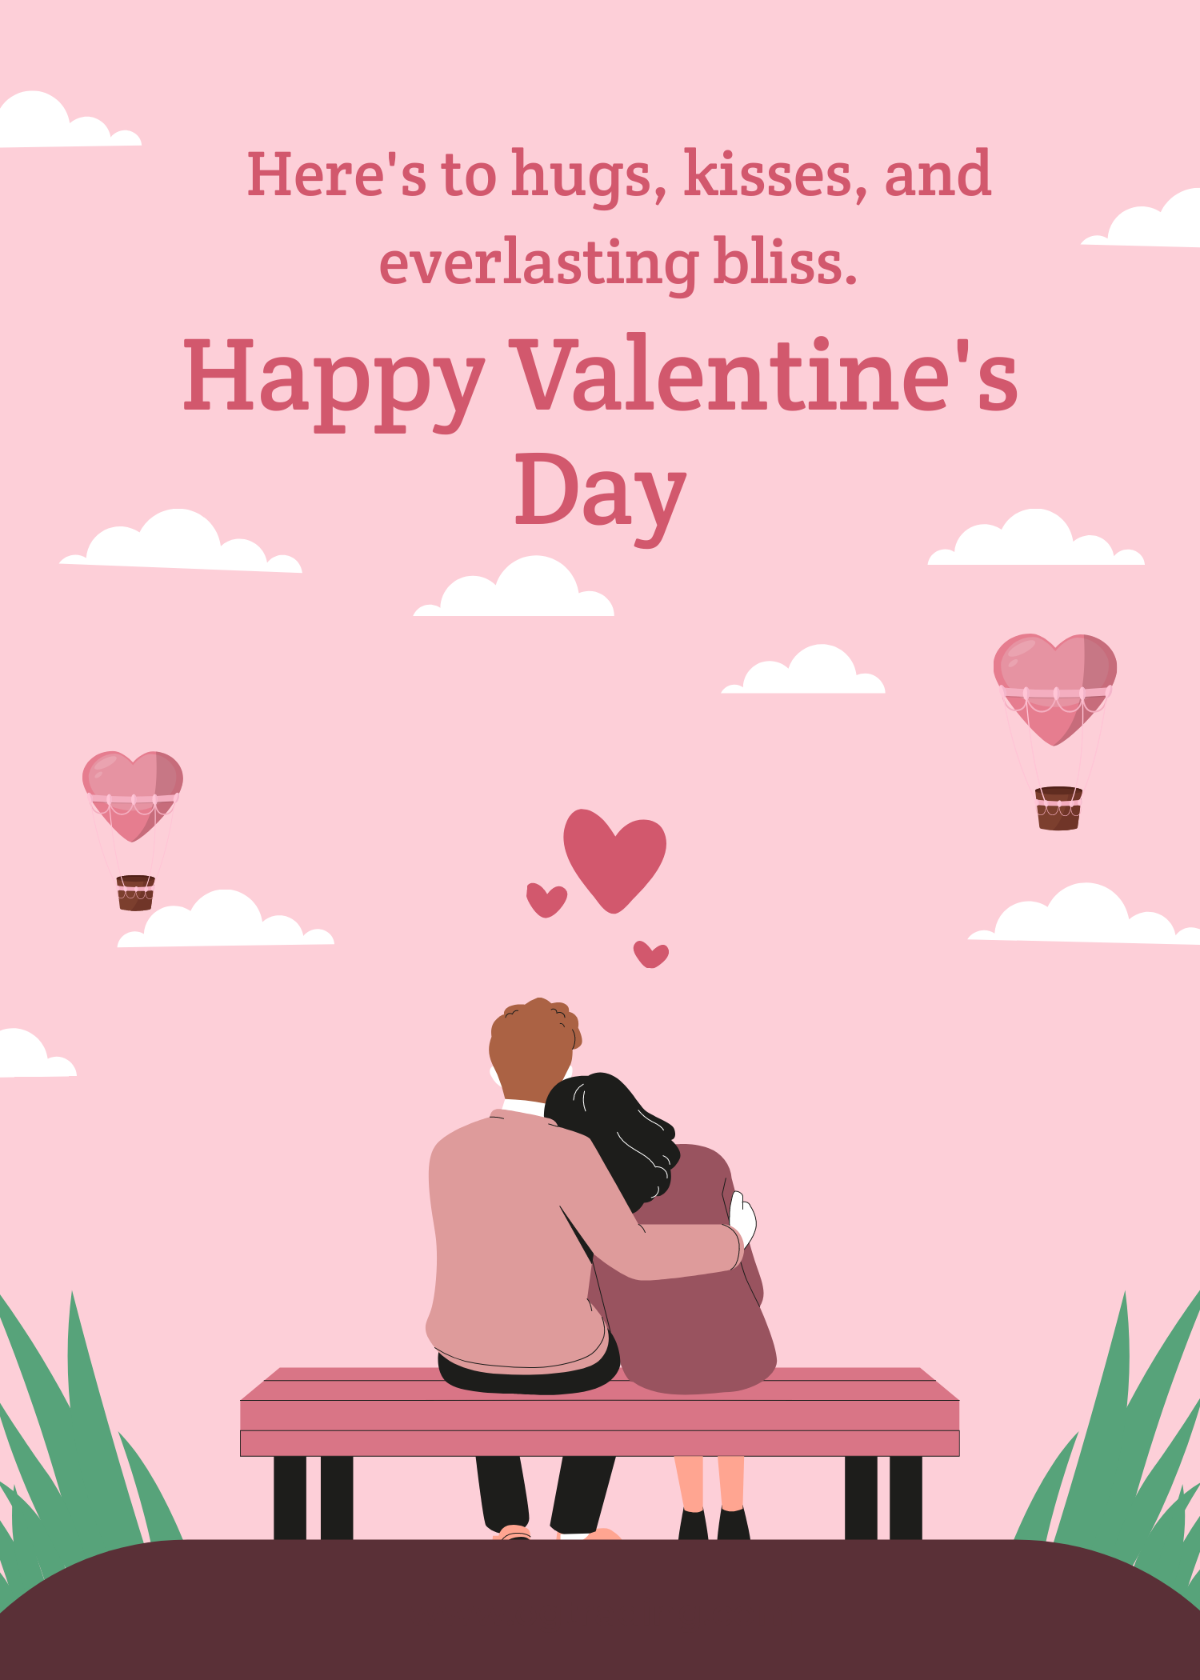 Happy Valentine's Day Message Wishes Template